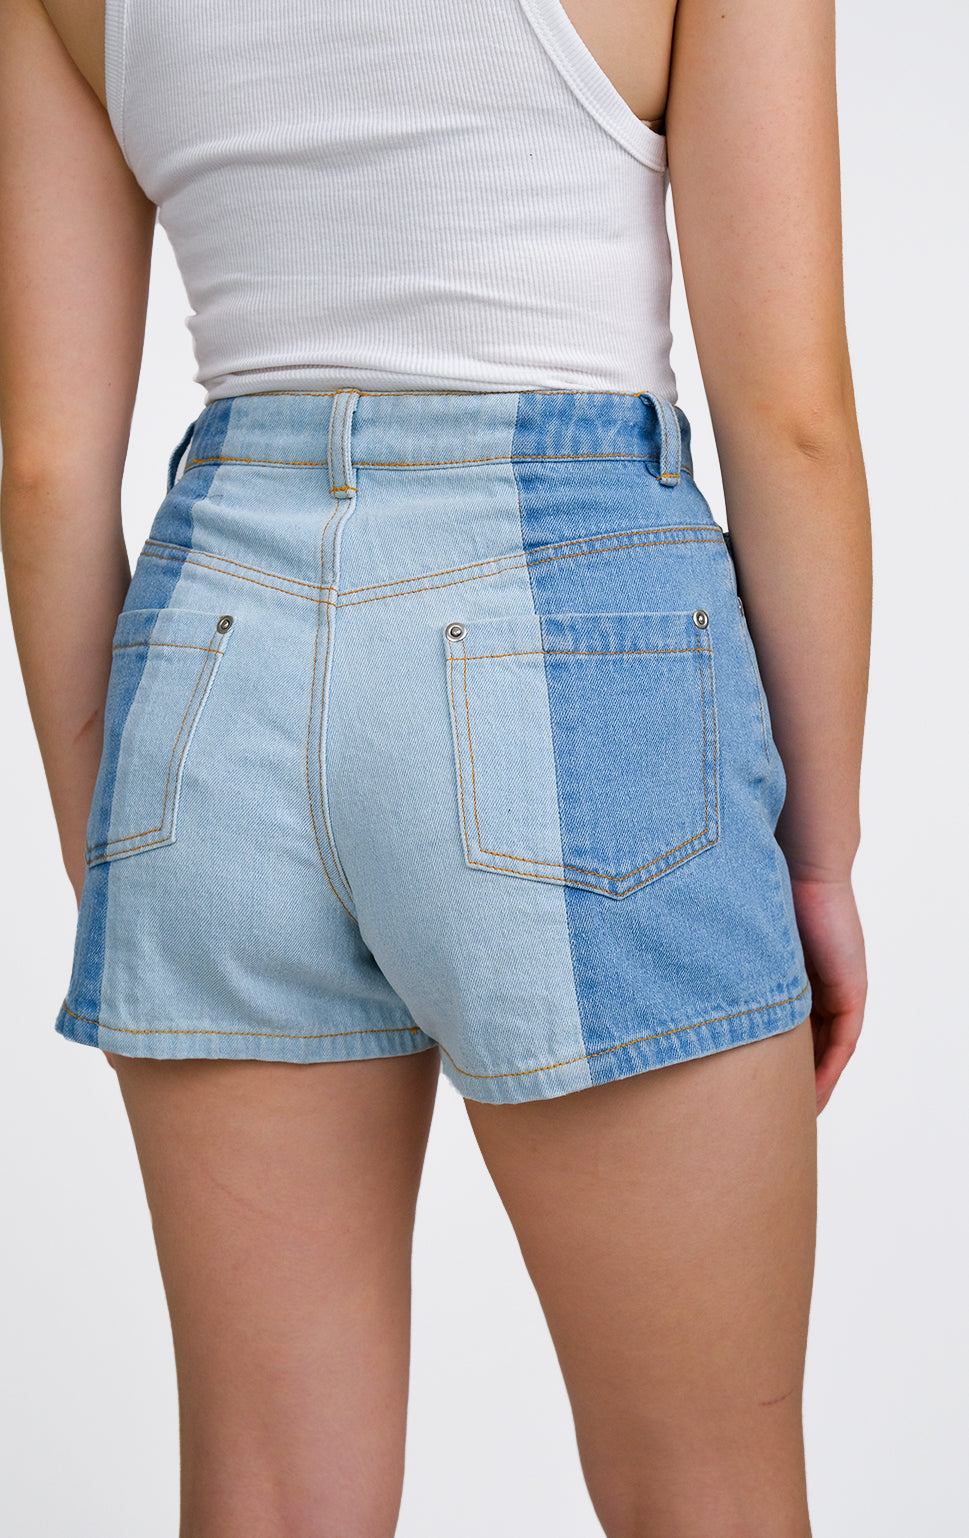 HIGH WAISTED TWO-TONED DENIM SHORTS